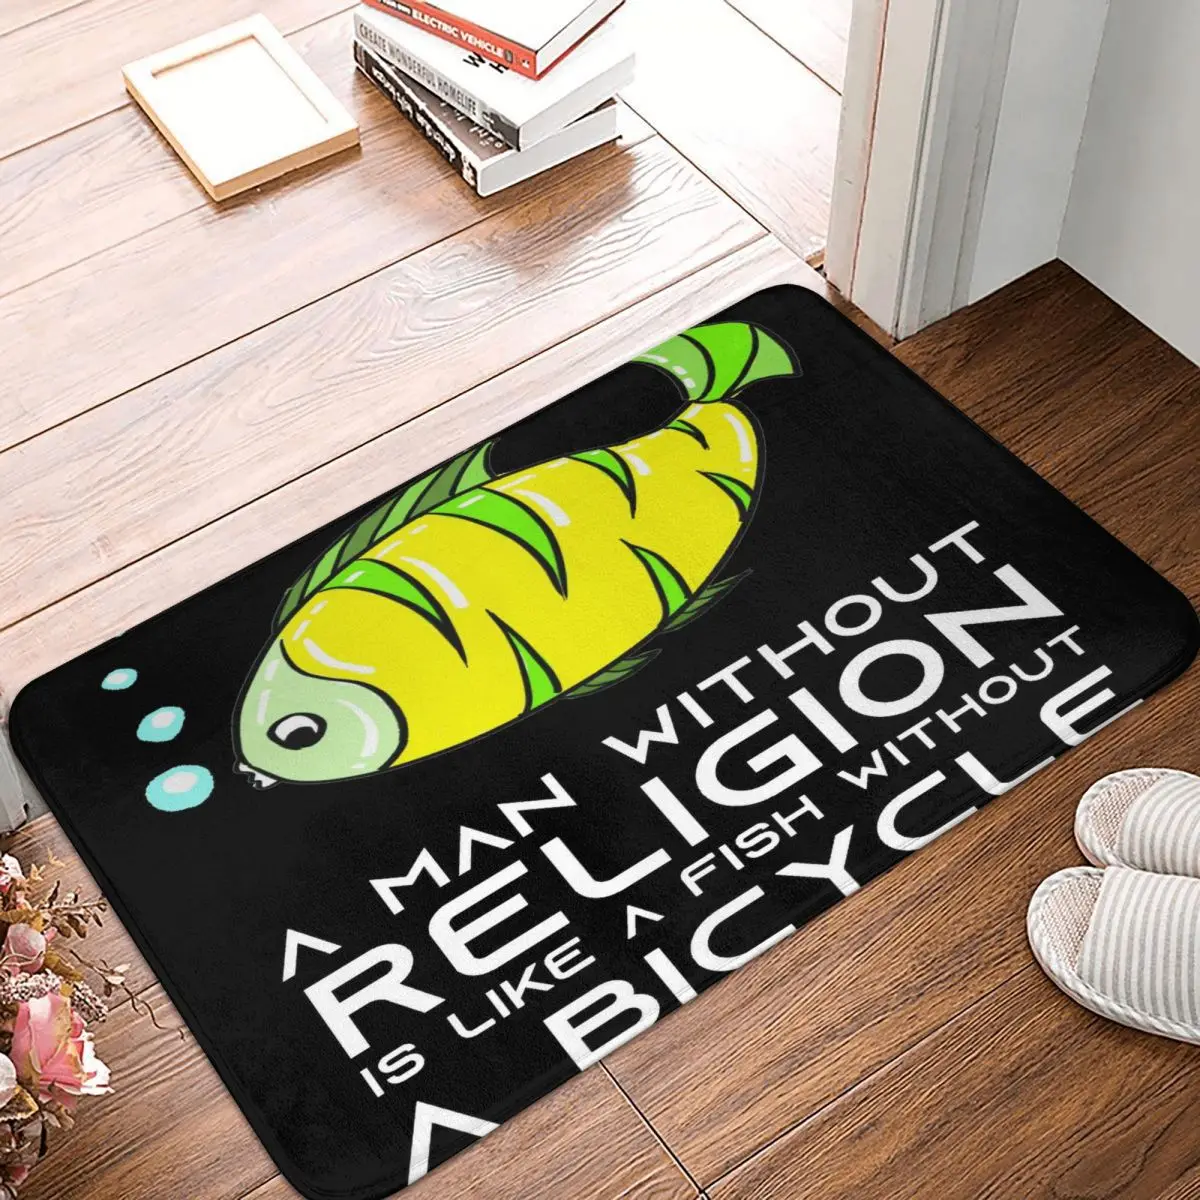 

A Man Without Religion Is Like A Fish Carpet, Polyester Floor Mats Modern Doorway Indoor Festivle Gifts Mats Customizable